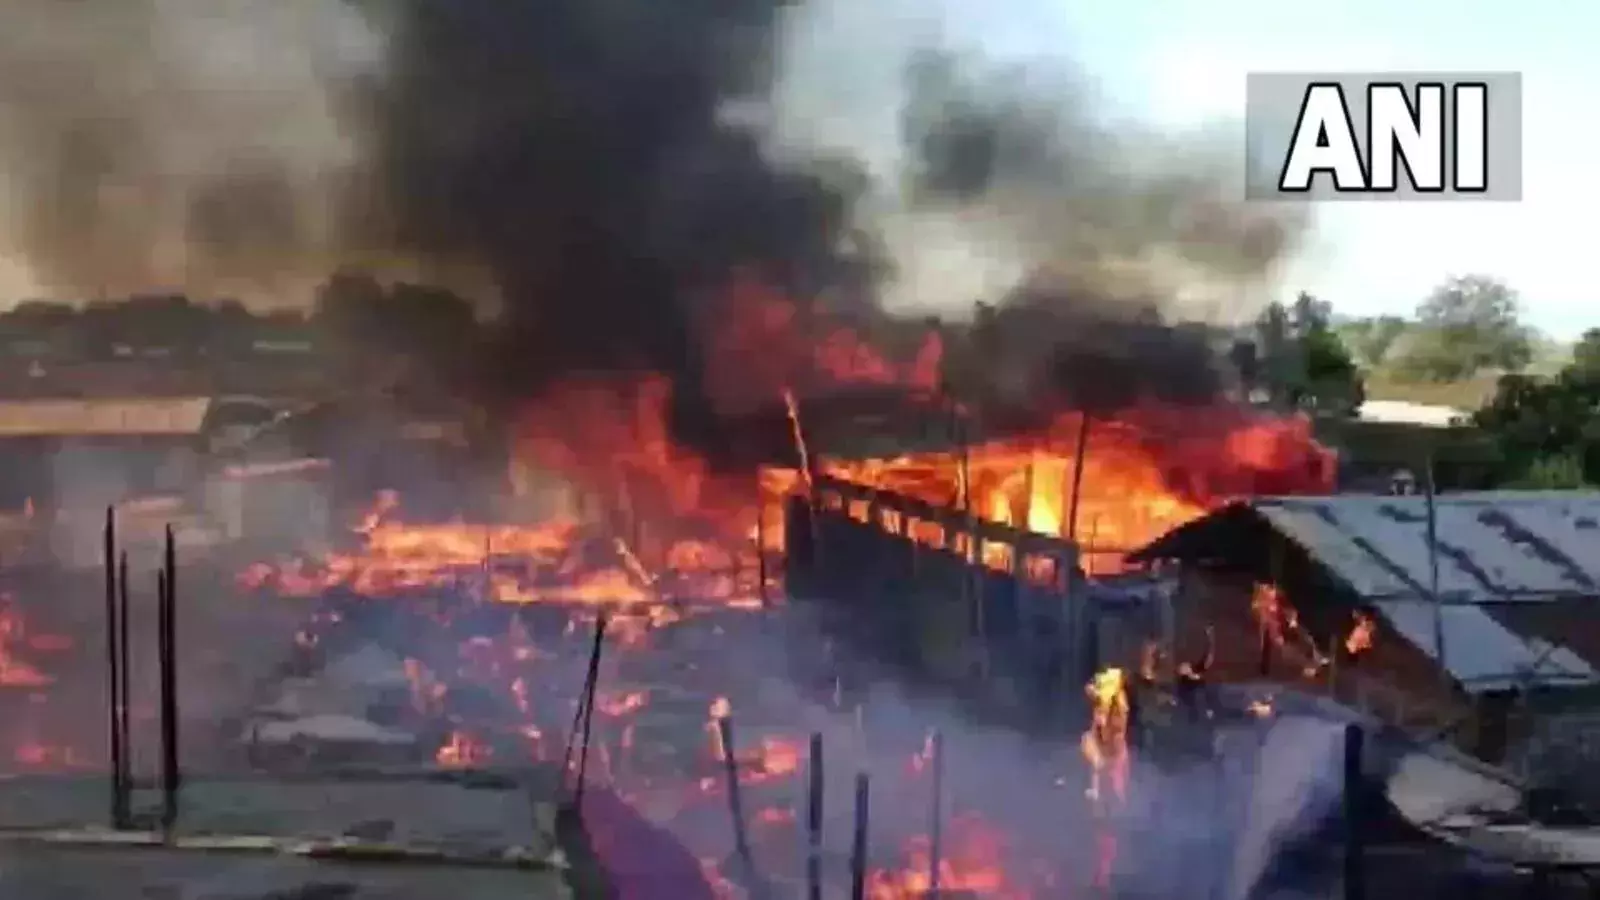 Assam fire: Nearly 100 houses and shops burnt, People are safe